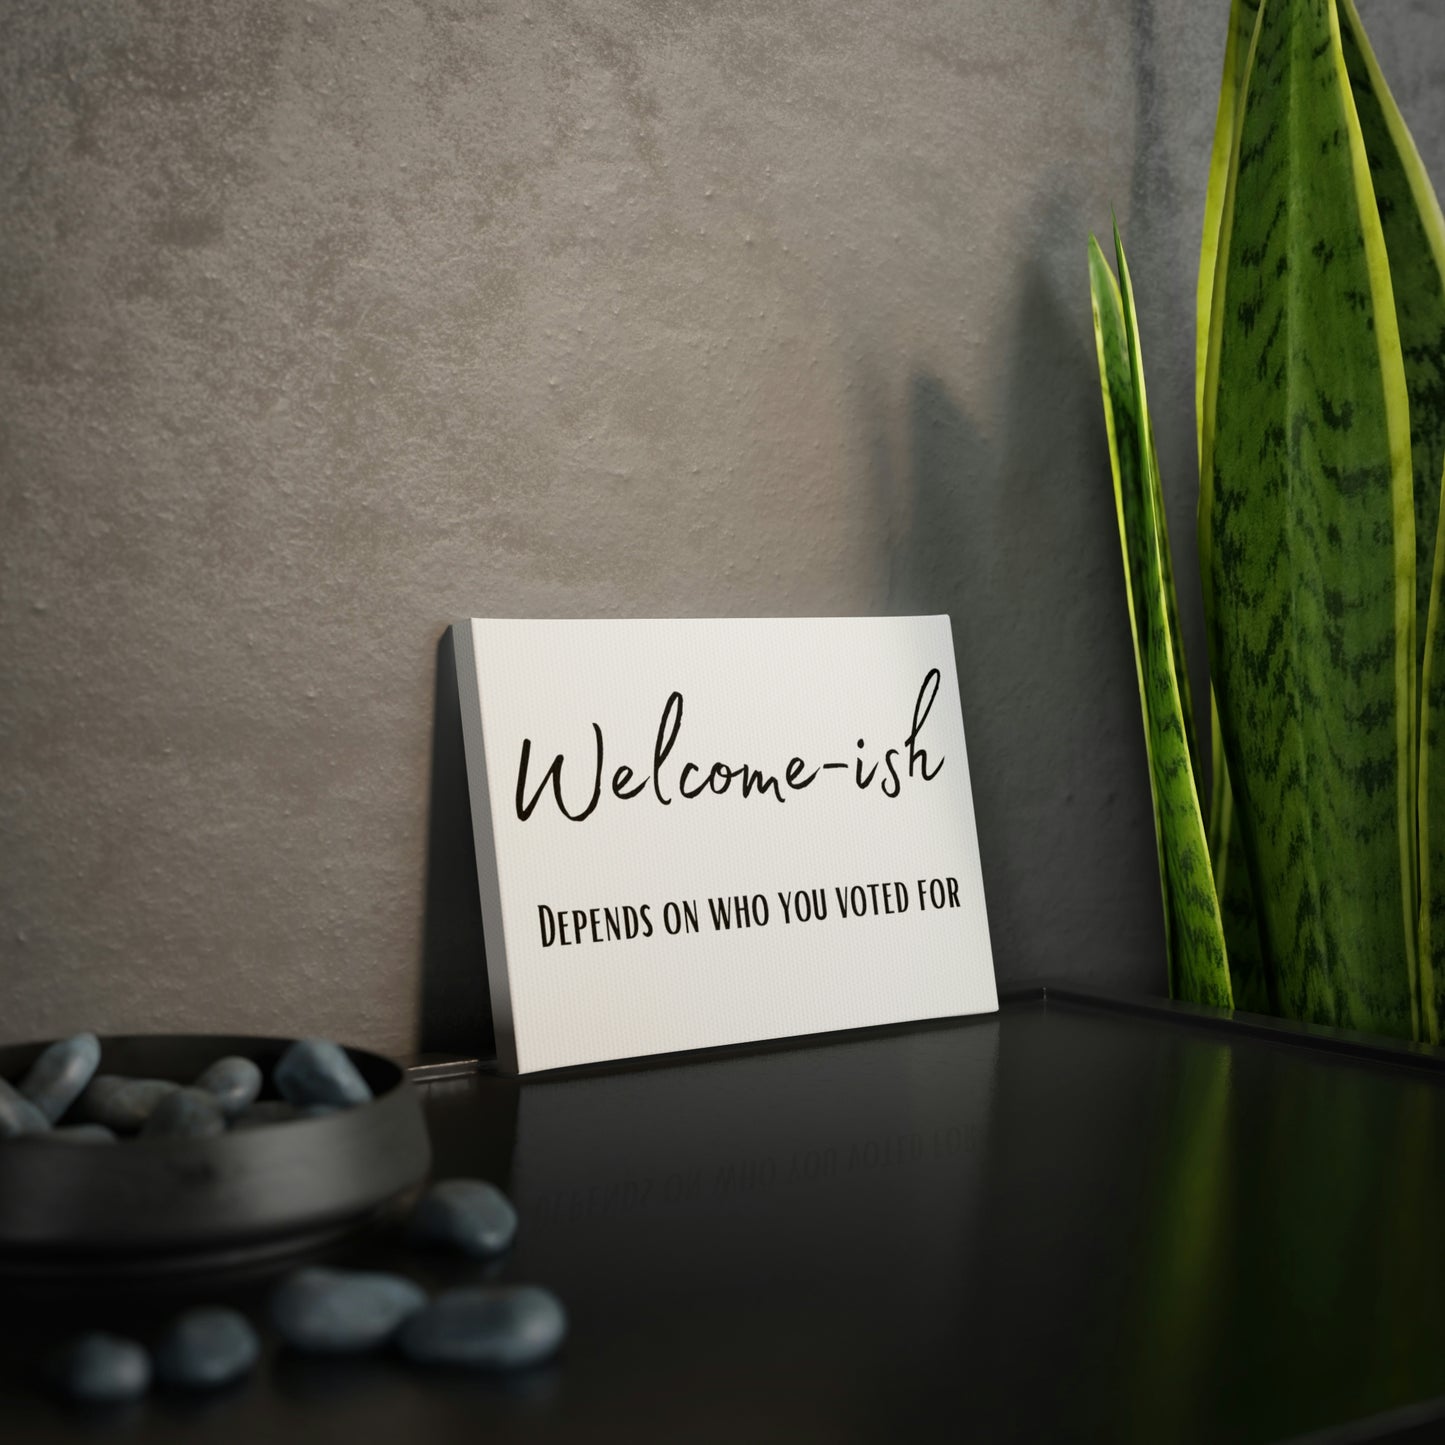 "Welcome-ish" Wall Decor - Weave Got Gifts - Unique Gifts You Won’t Find Anywhere Else!